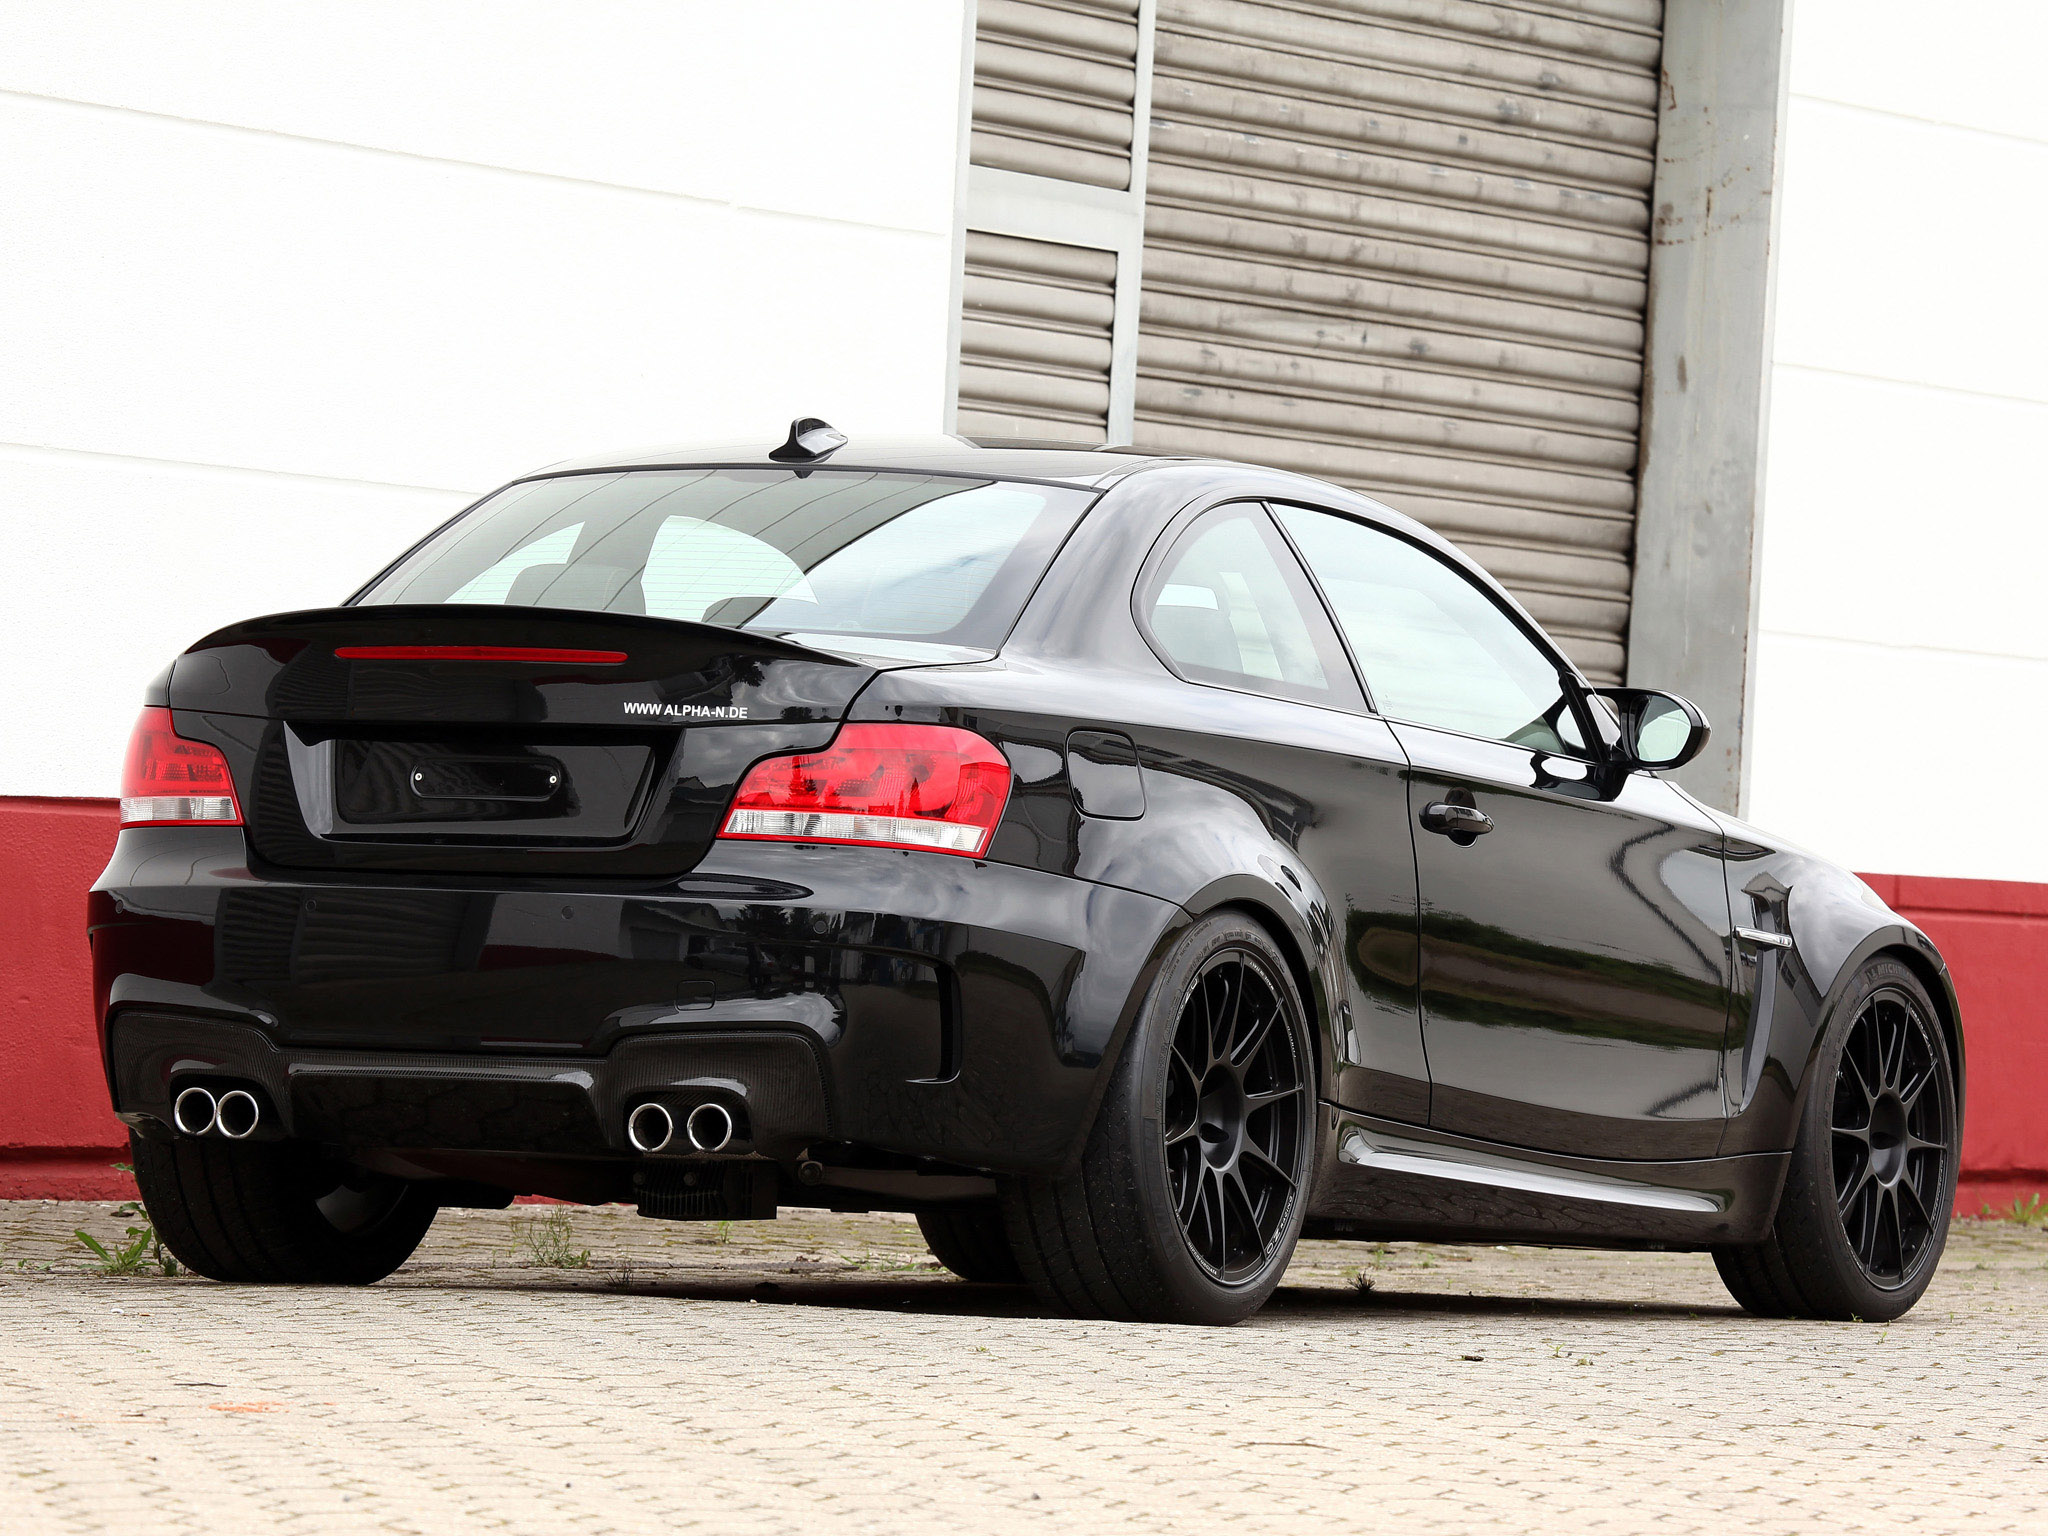 2012, Alpha n, E82, Bmw, 1 m, Coupe, R s, Tuning Wallpaper